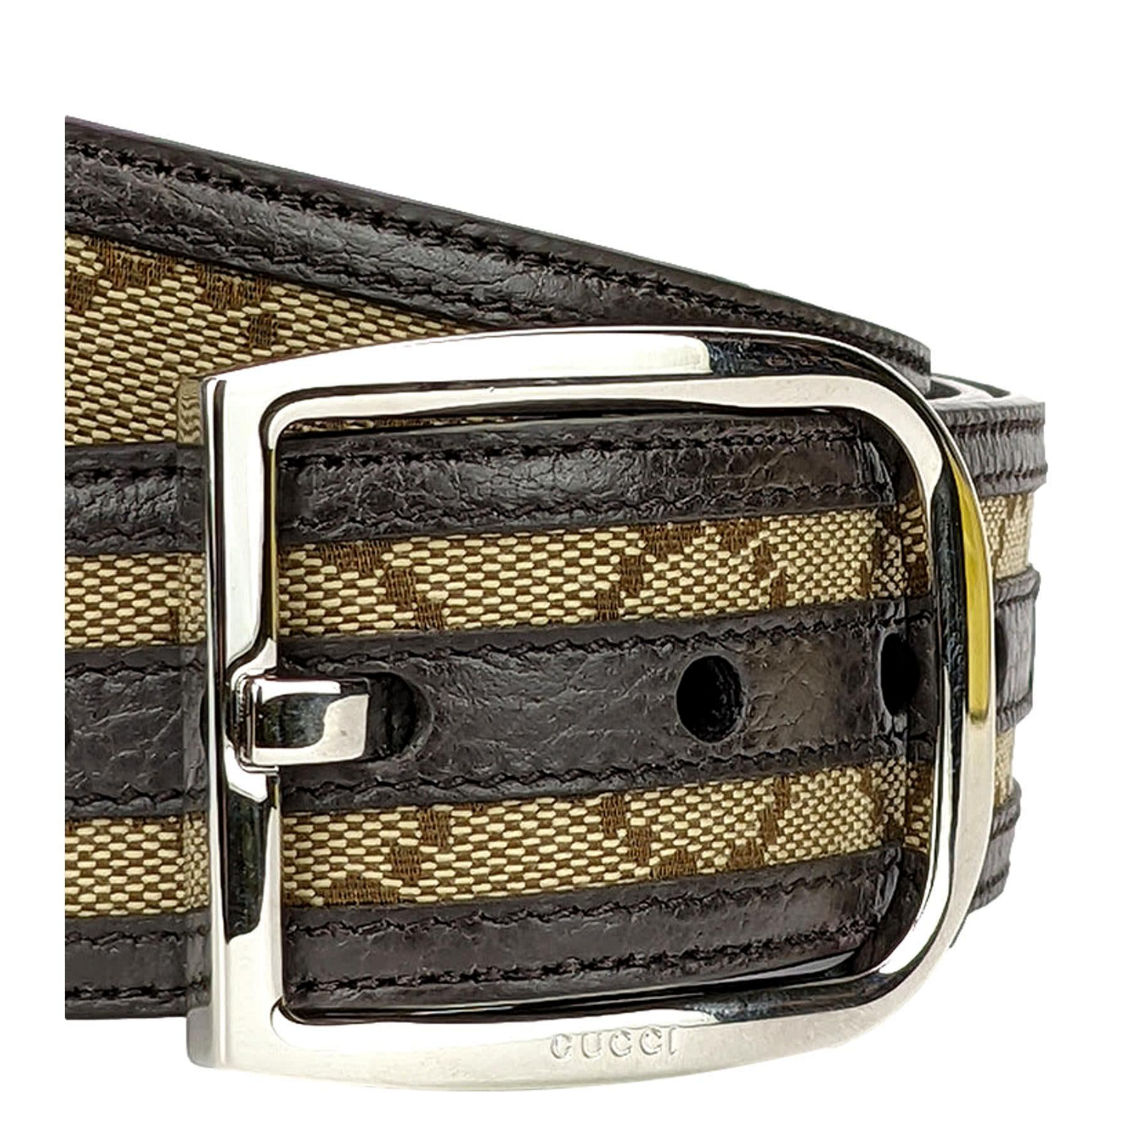 Gucci Mens GG Brown and Beige Size 36/90 Canvas Leather Trim Belt (New) - Image 5 of 5